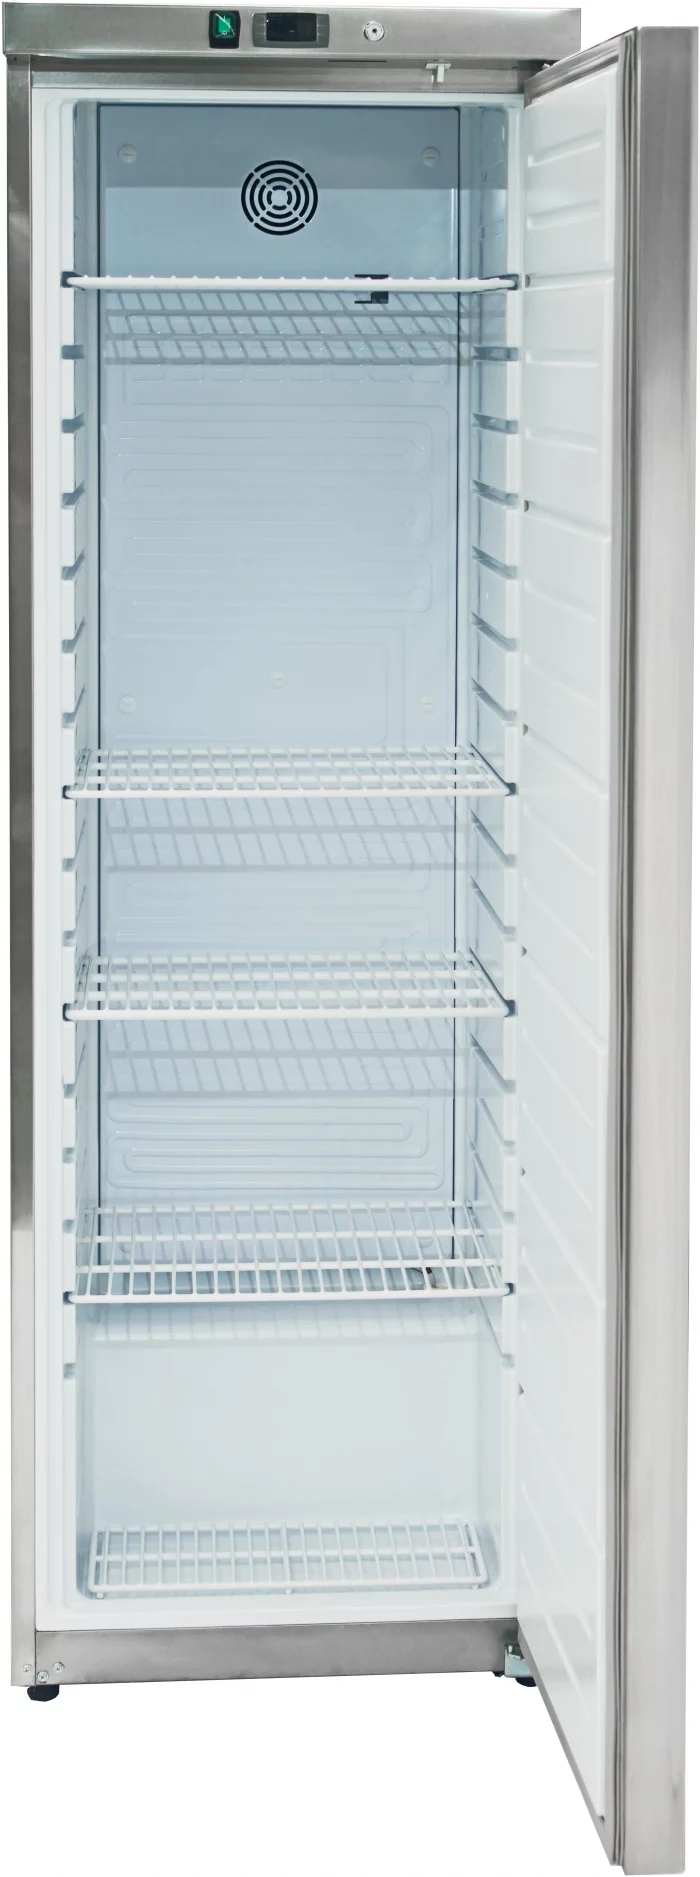 Sterling Pro Refrigerator Cobus SPR400S Single Door Stainless Steel Upright 360 Litres 835 scaled Sterling Pro Refrigerator Cobus SPR400S Single Door Stainless Steel Upright 360 Litres.